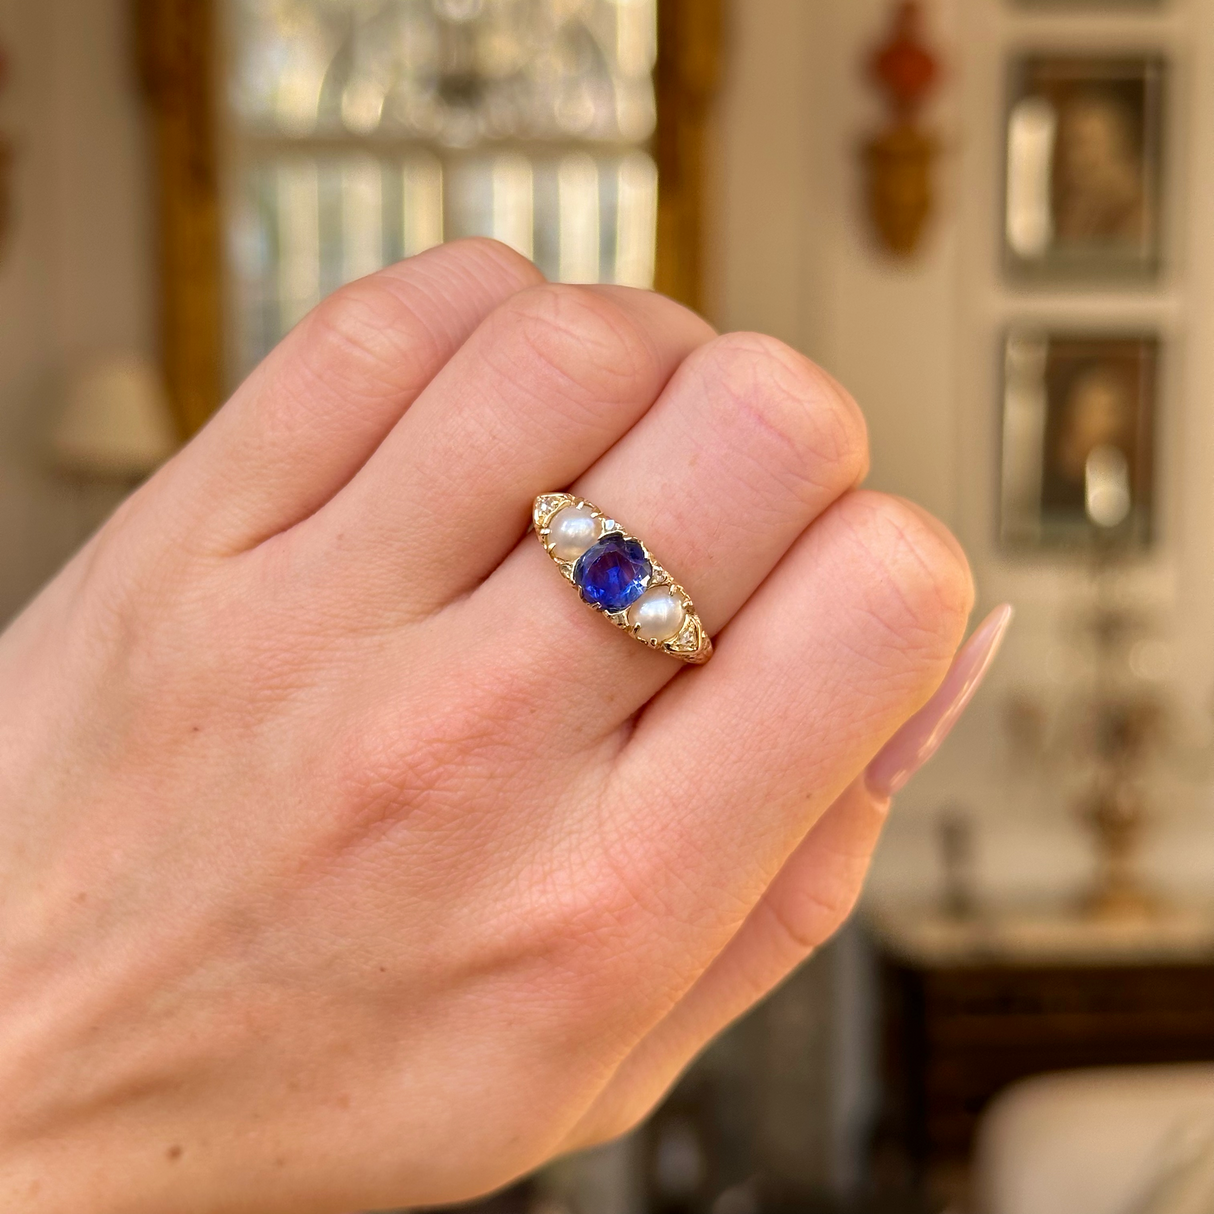 antique sapphire and pearl three stone ring worn on closed hand.